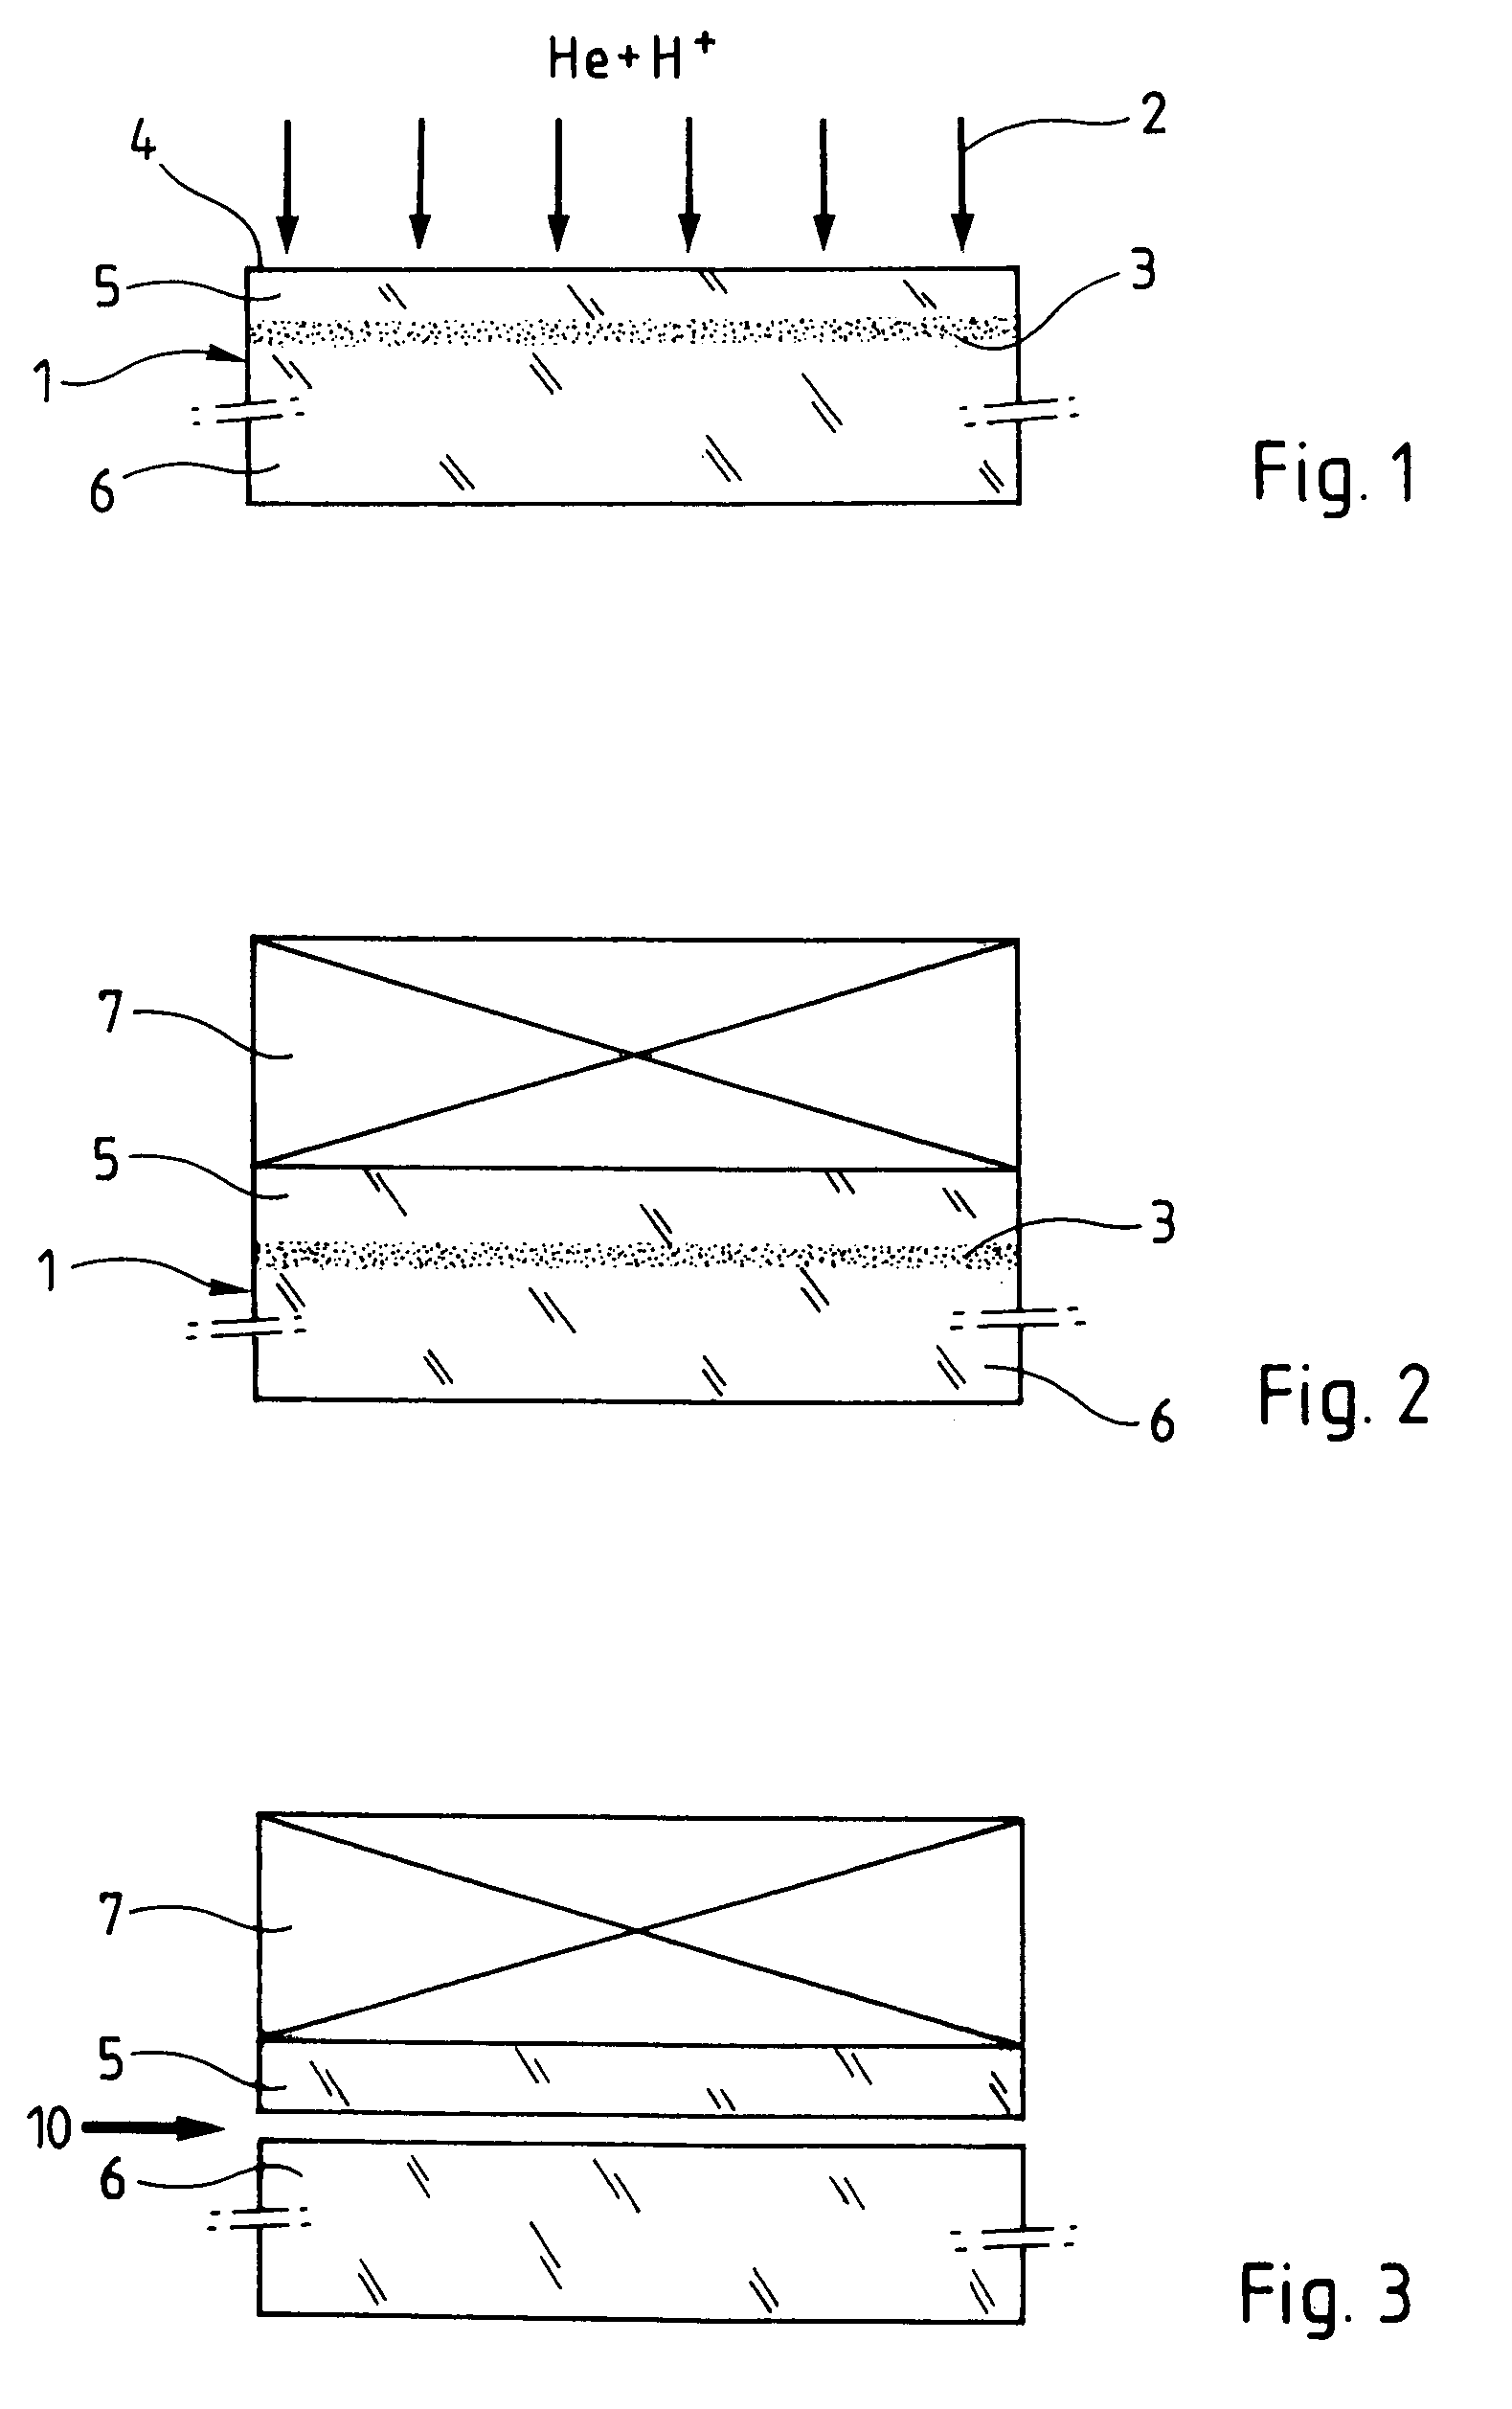 Method of catastrophic transfer of a thin film after co-implantation